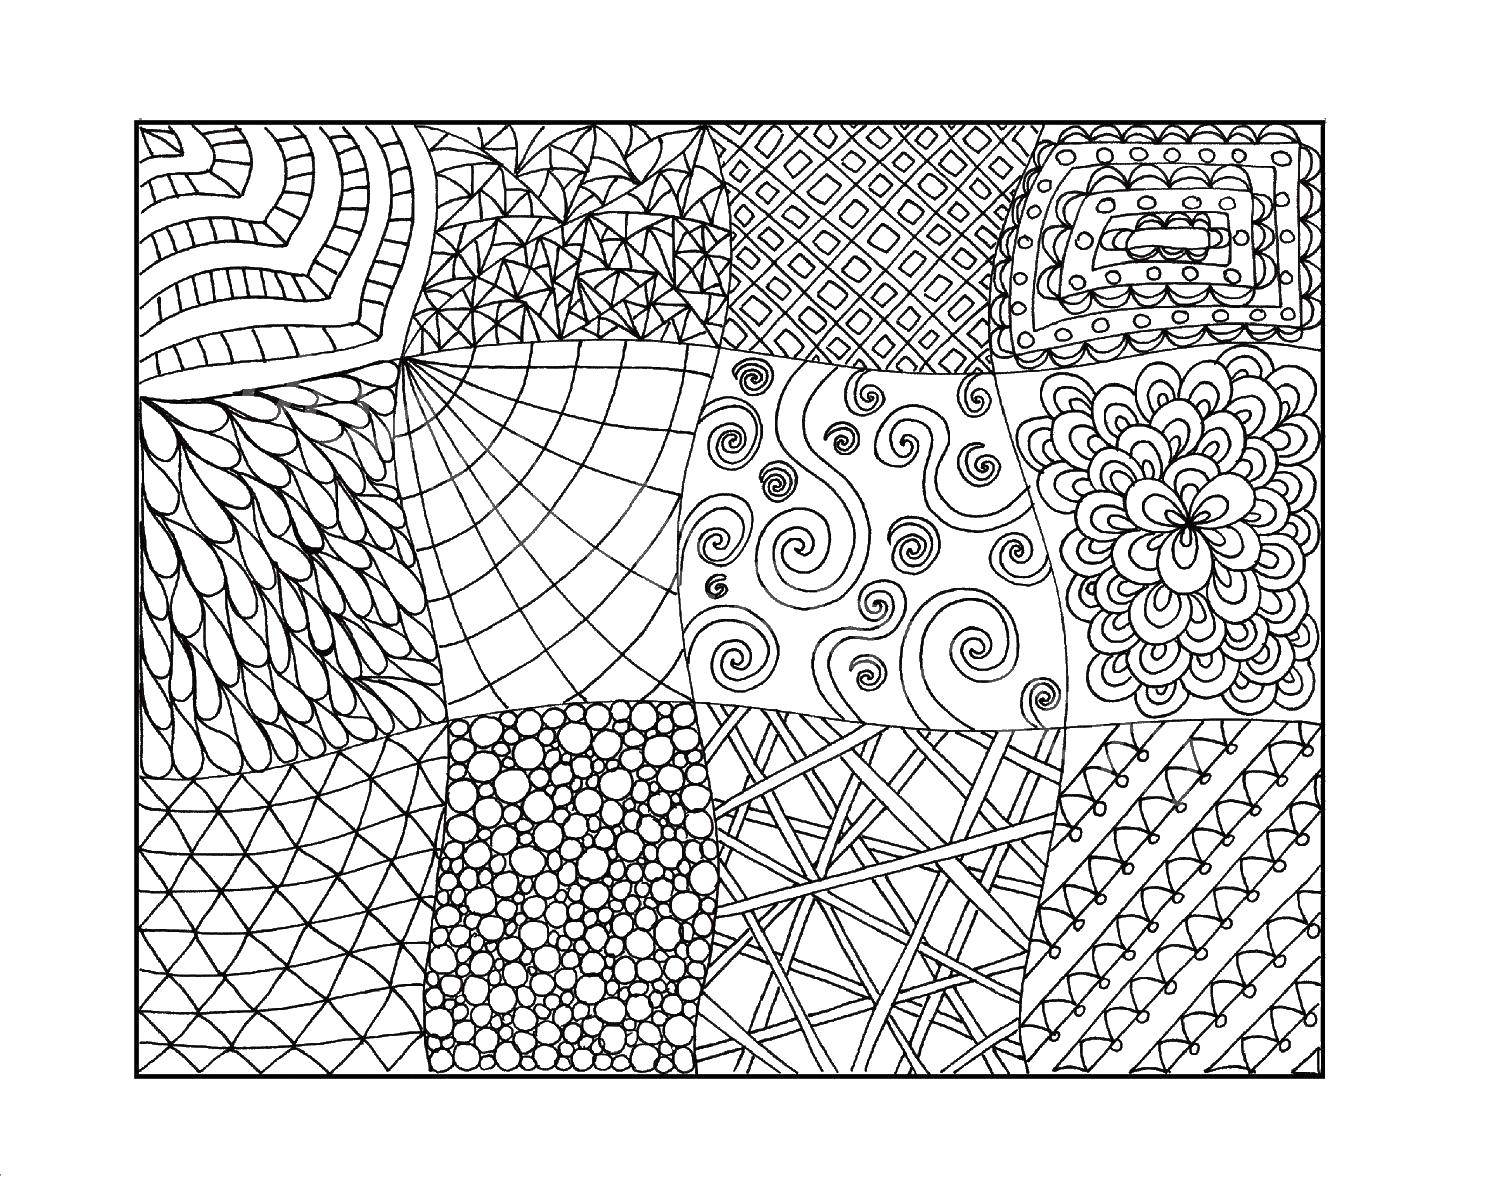 Coloring Squares with patterns. Category With patterns. Tags:  Patterns, geometric.